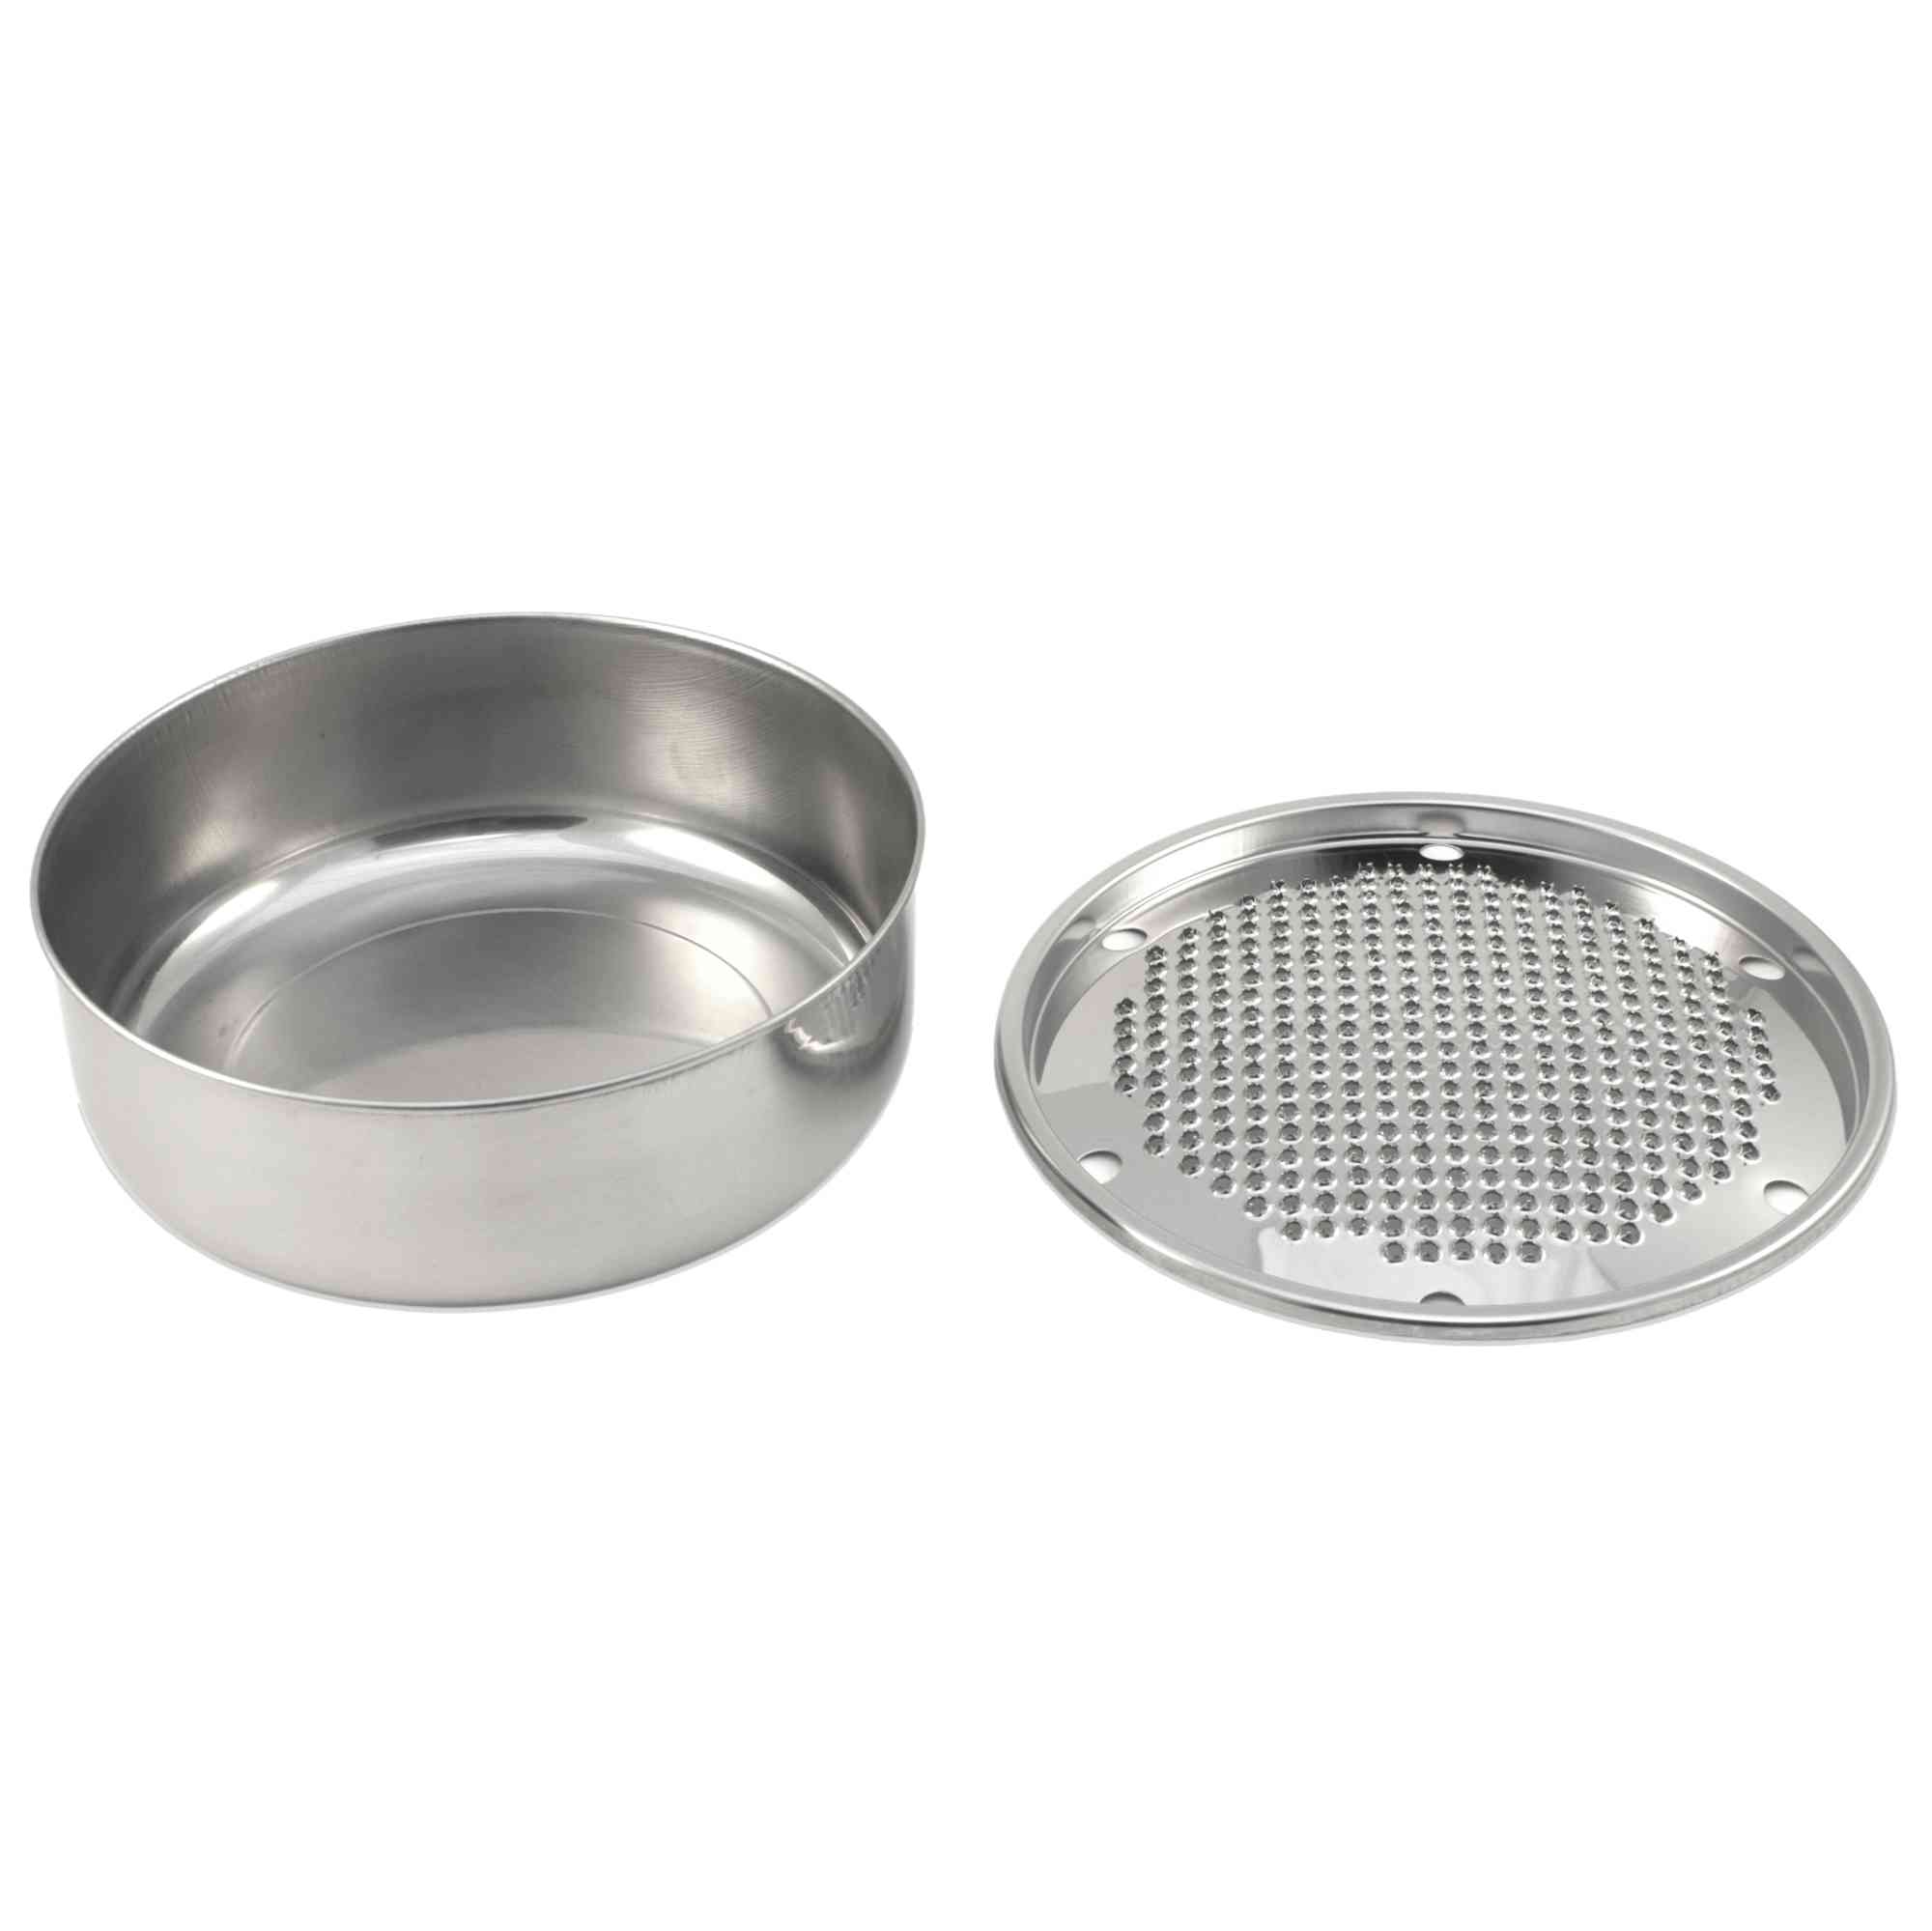 https://www.italiancookshop.com/cdn/shop/products/stainless-steel-parmesan-cheese-grater-with-collecting-bowl.jpg?v=1646994896